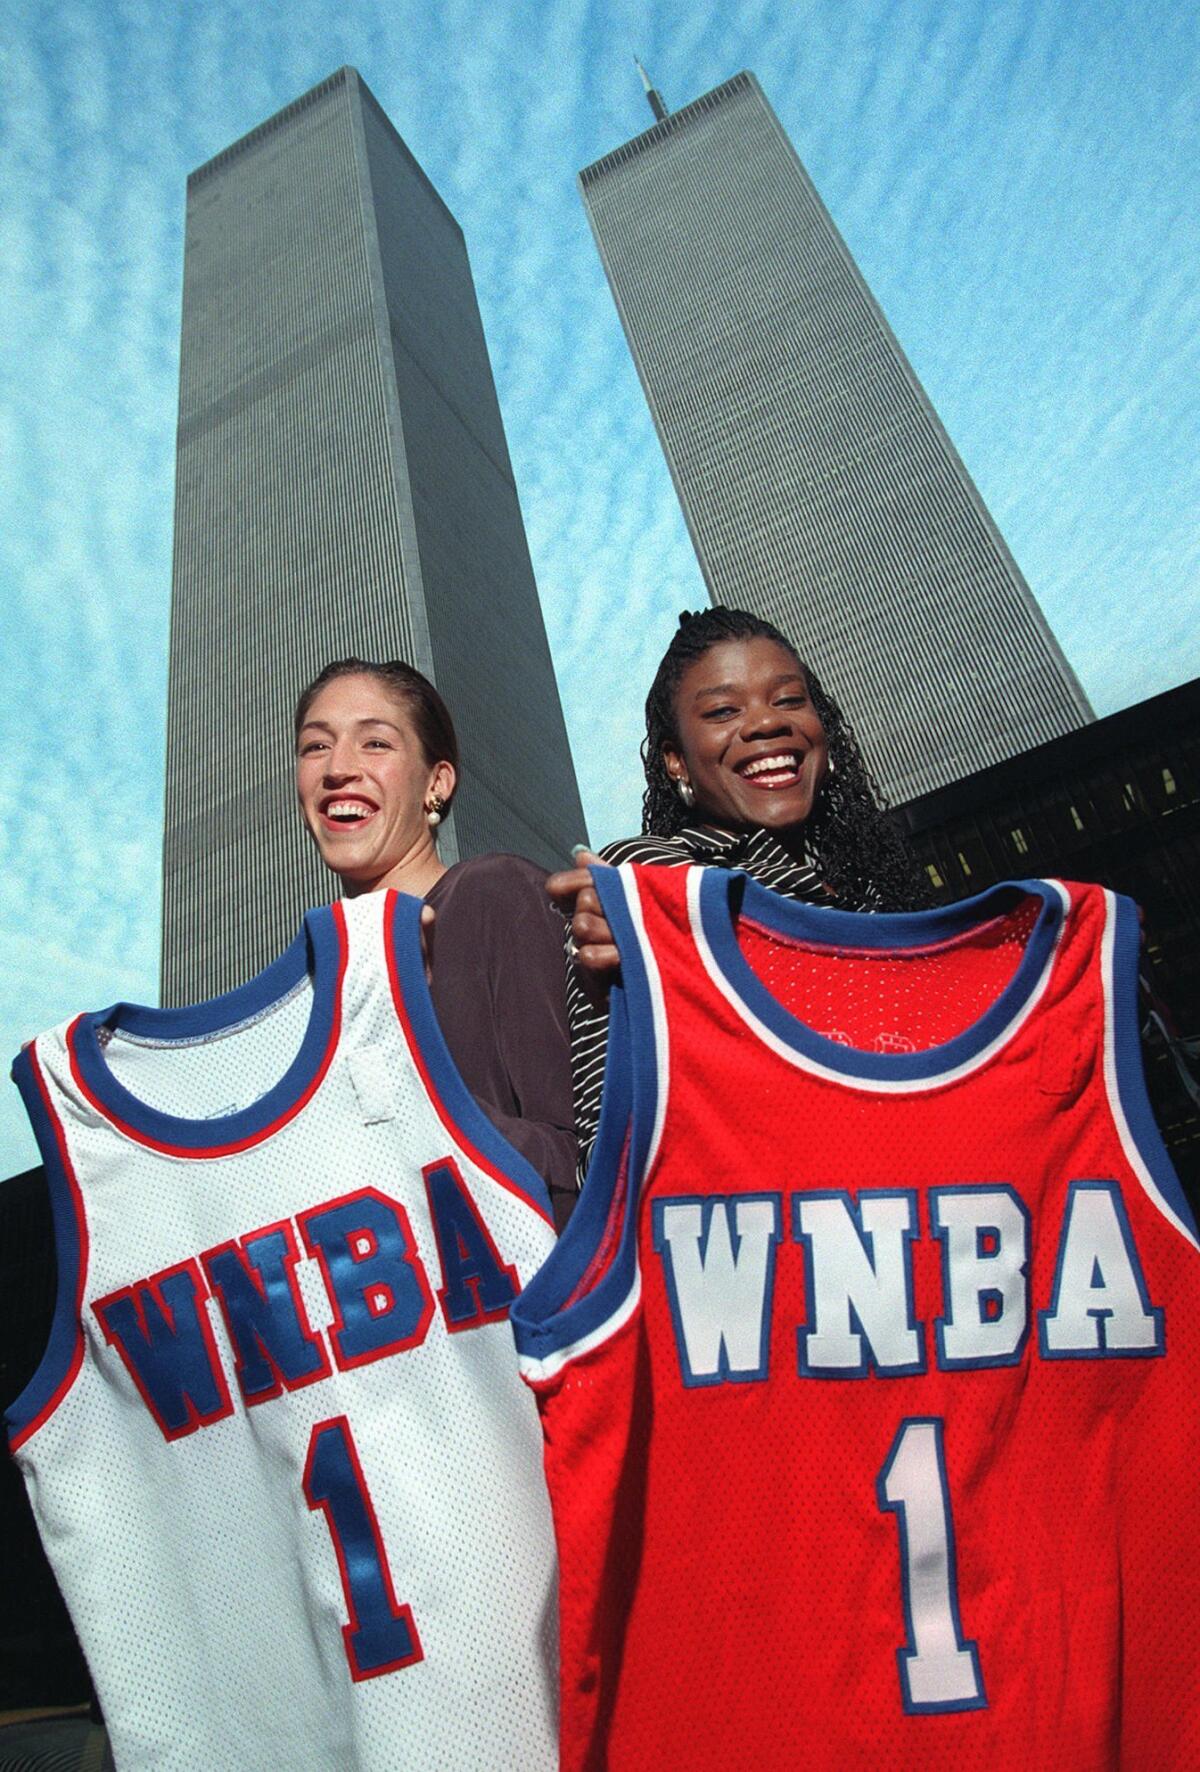 Olympic gold medalists Rebecca Lobo, left, and Sheryl Swoopes display their jerseys for the inaugural season of the Women's National Basketball Assn. in the shadow of New York's World Trade Center on Oct. 23, 1996.